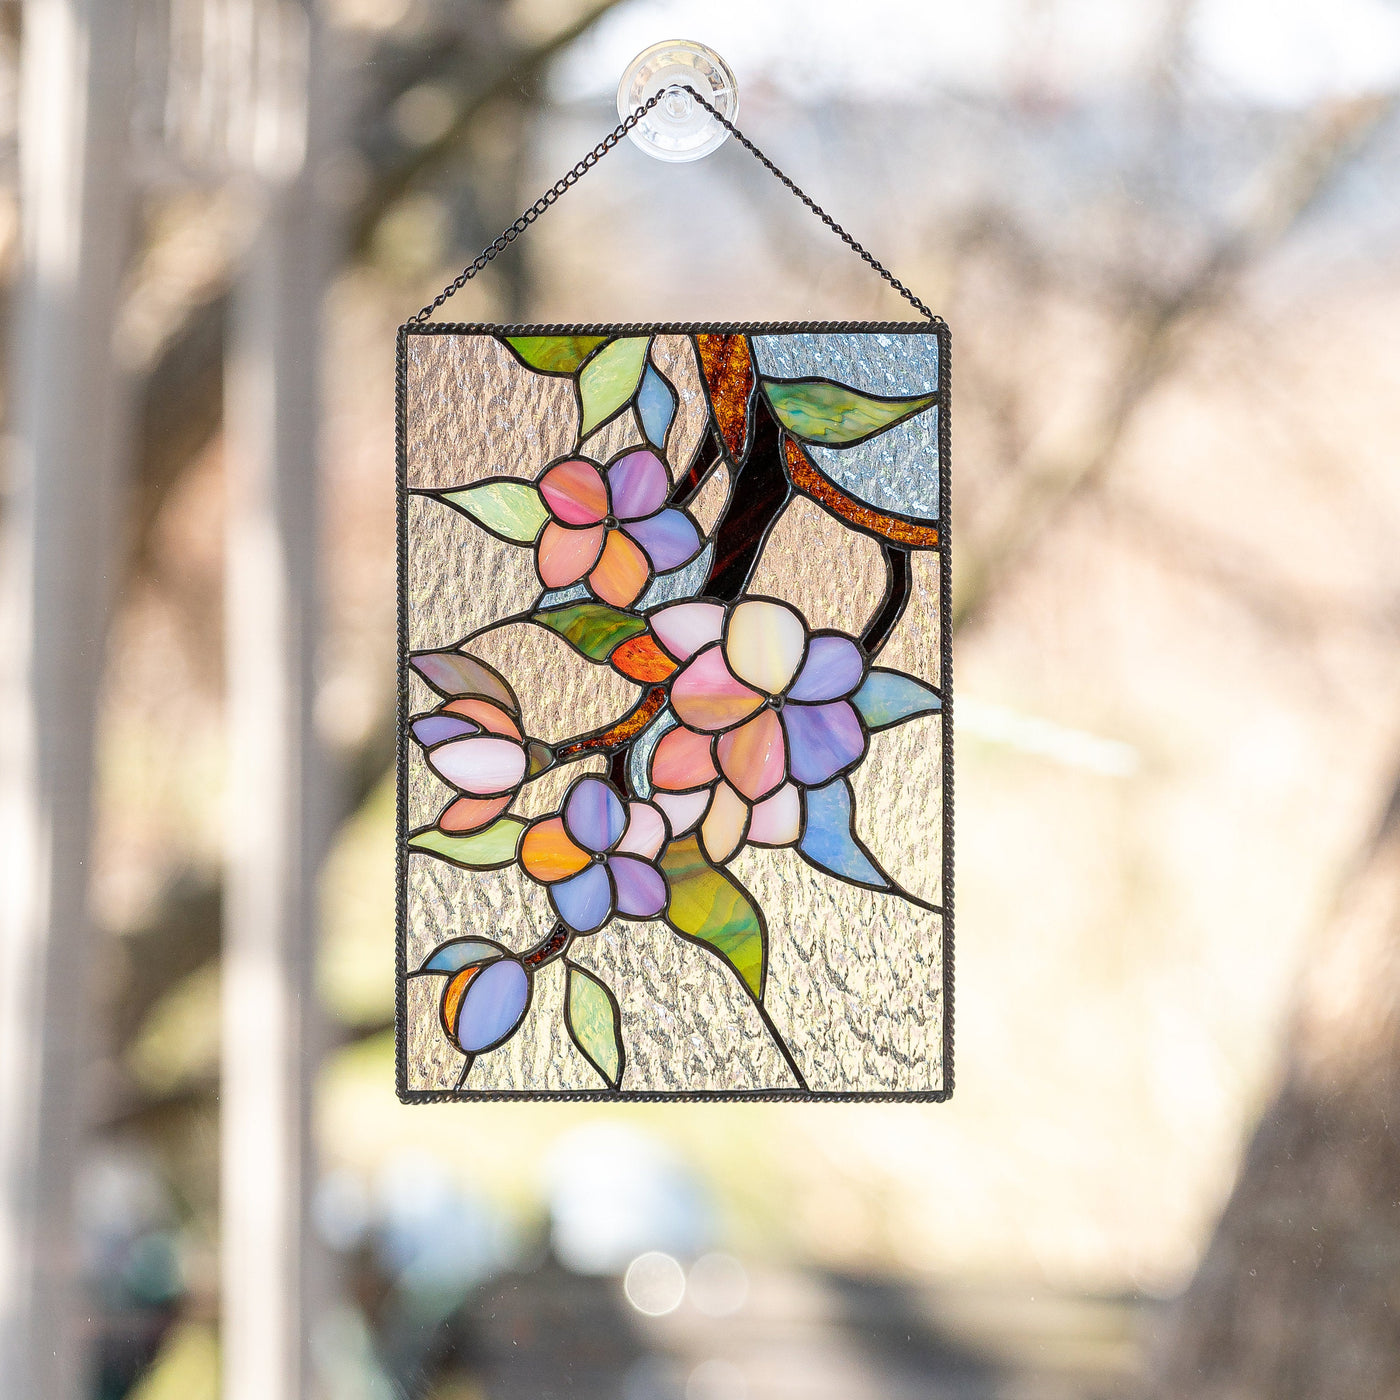 Cherry blossom stained glass